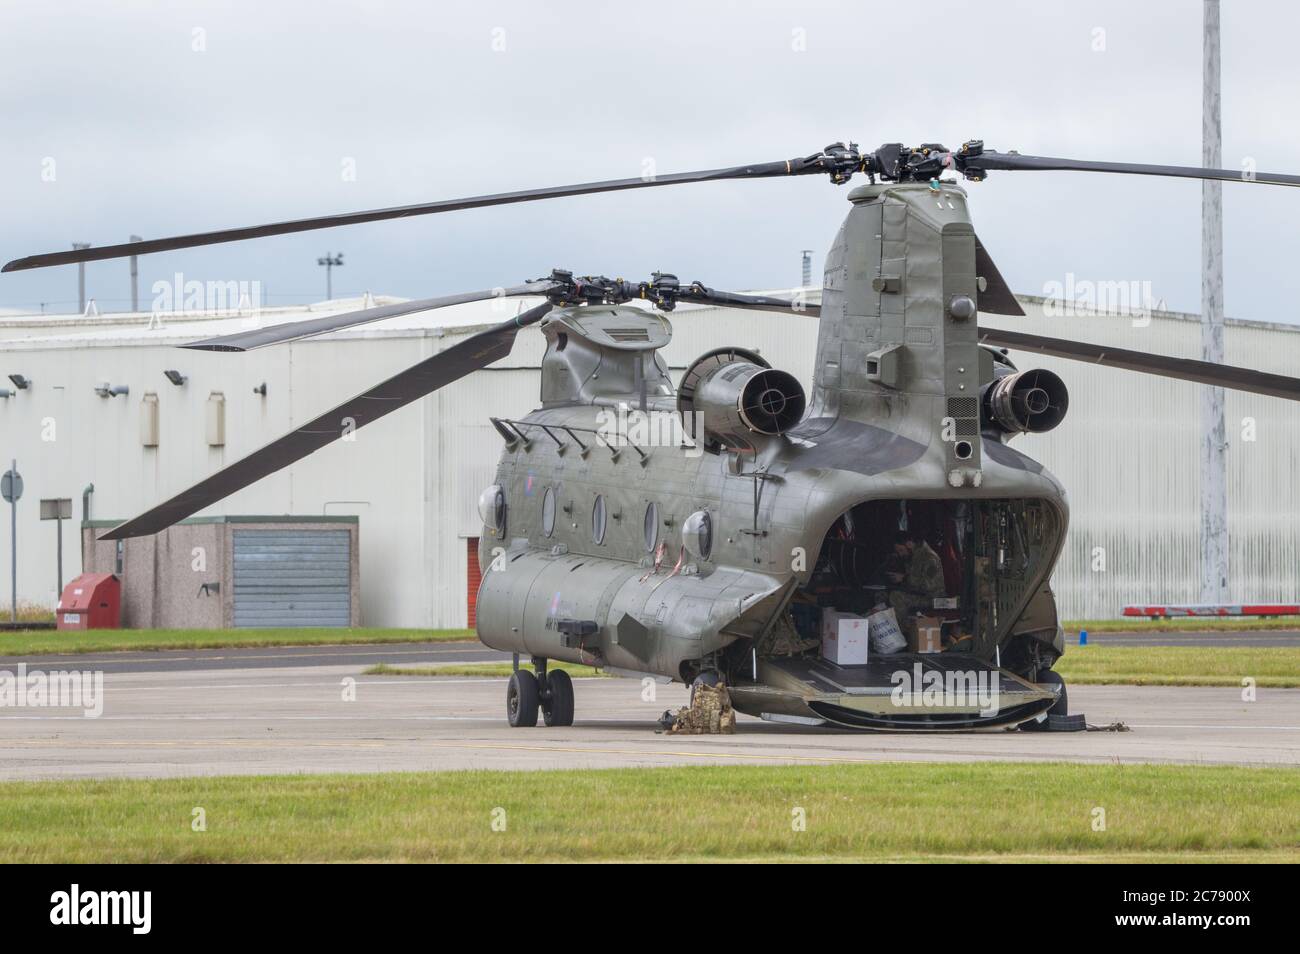 Glasgow, Scotland, UK.15 July 2020. Pictured: Royal Air Force Chinook Helicopters seen on the tarmac at Glasgow International Airport. One of the helicopters have gone ‘tech’ and a spare part has been flown in. Credit: Colin Fisher/Alamy Live News Stock Photo